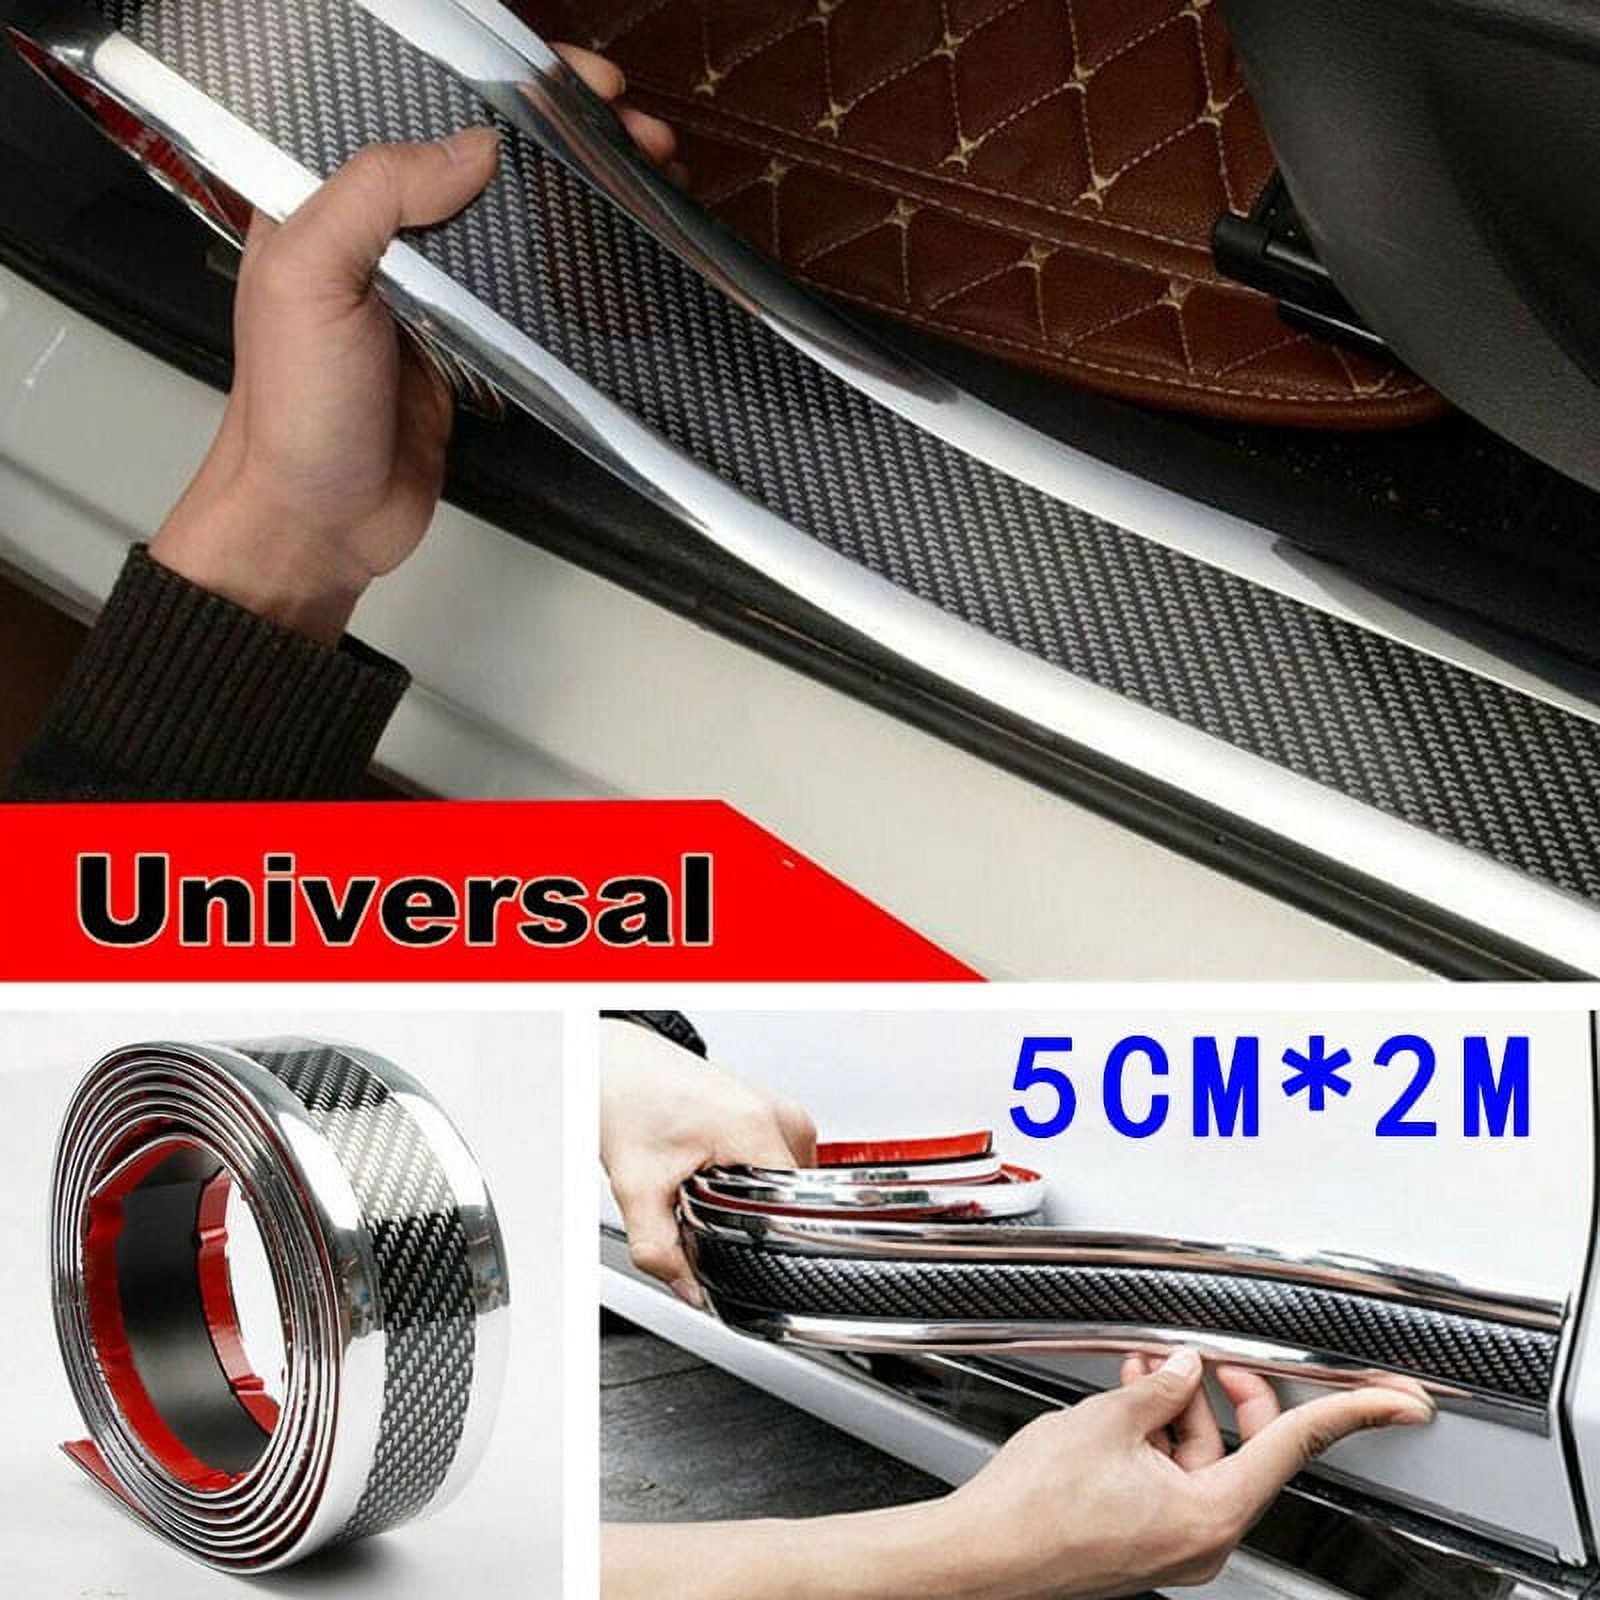 4pcs Car Threshold Door Sill Protector Anti Scratch for Cadillac